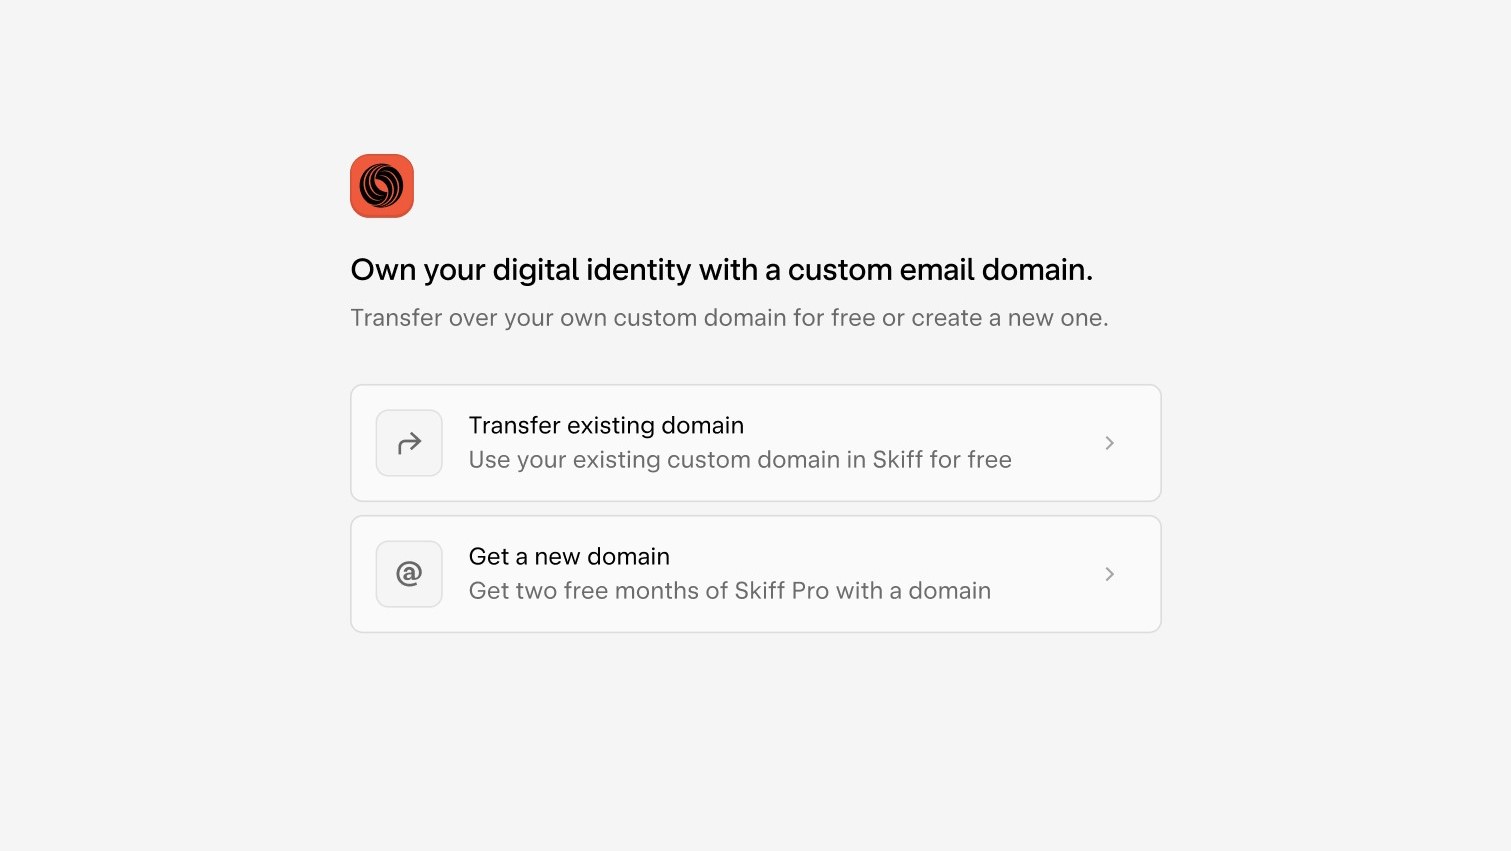 Skiff interface to transfer an existing domain or get a new one